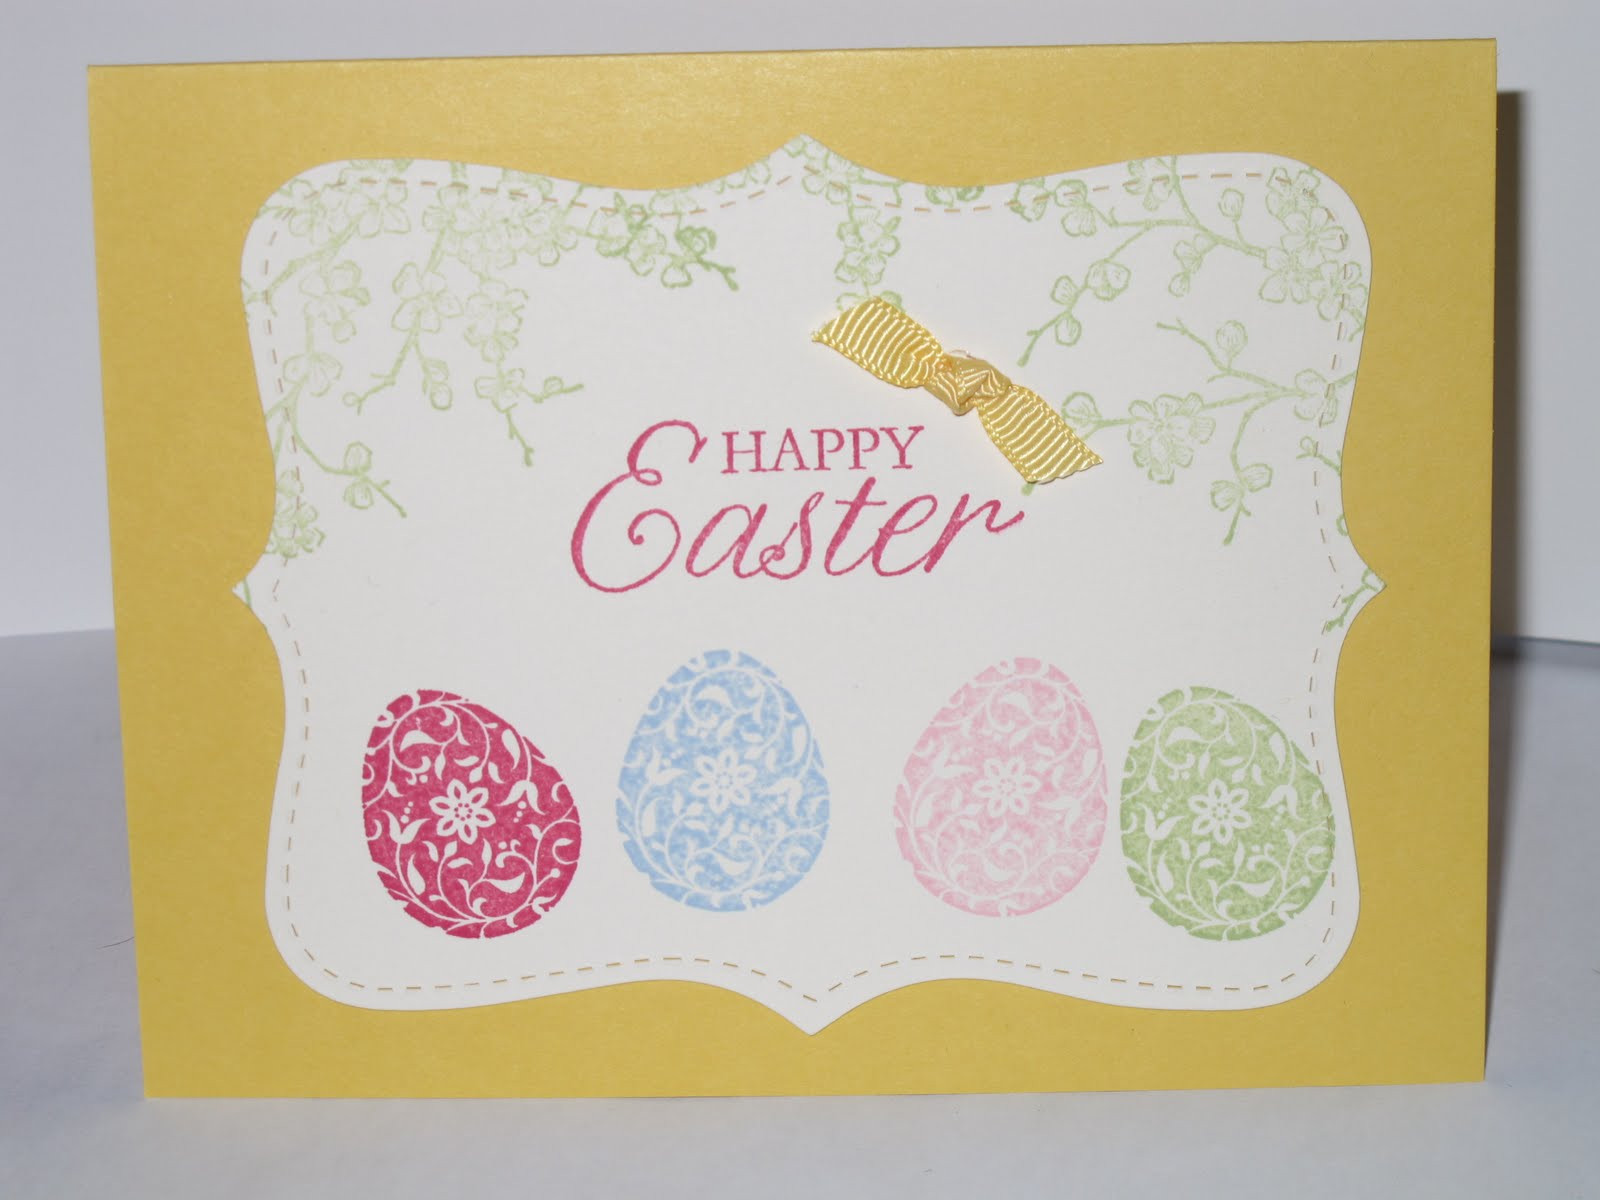 Stampin Up Easter Cards Ideas
 My Stamping Friends Happy Easter and Stampin Up Easter